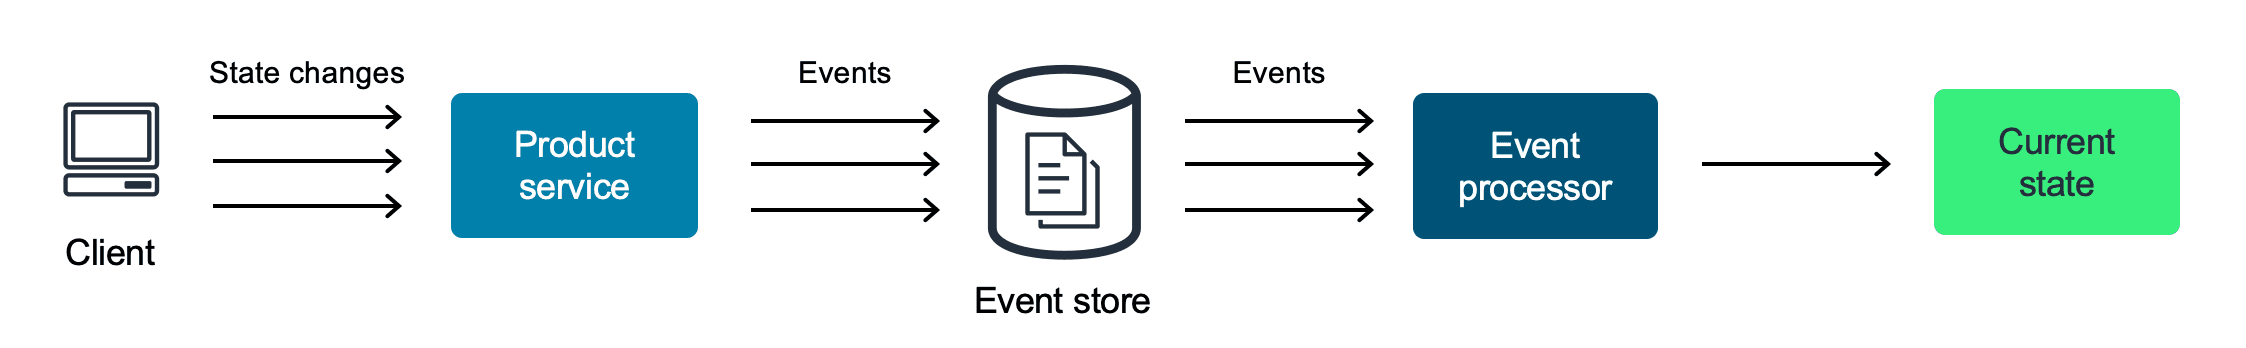 Architecture diagram showing an event sourcing architecture pattern